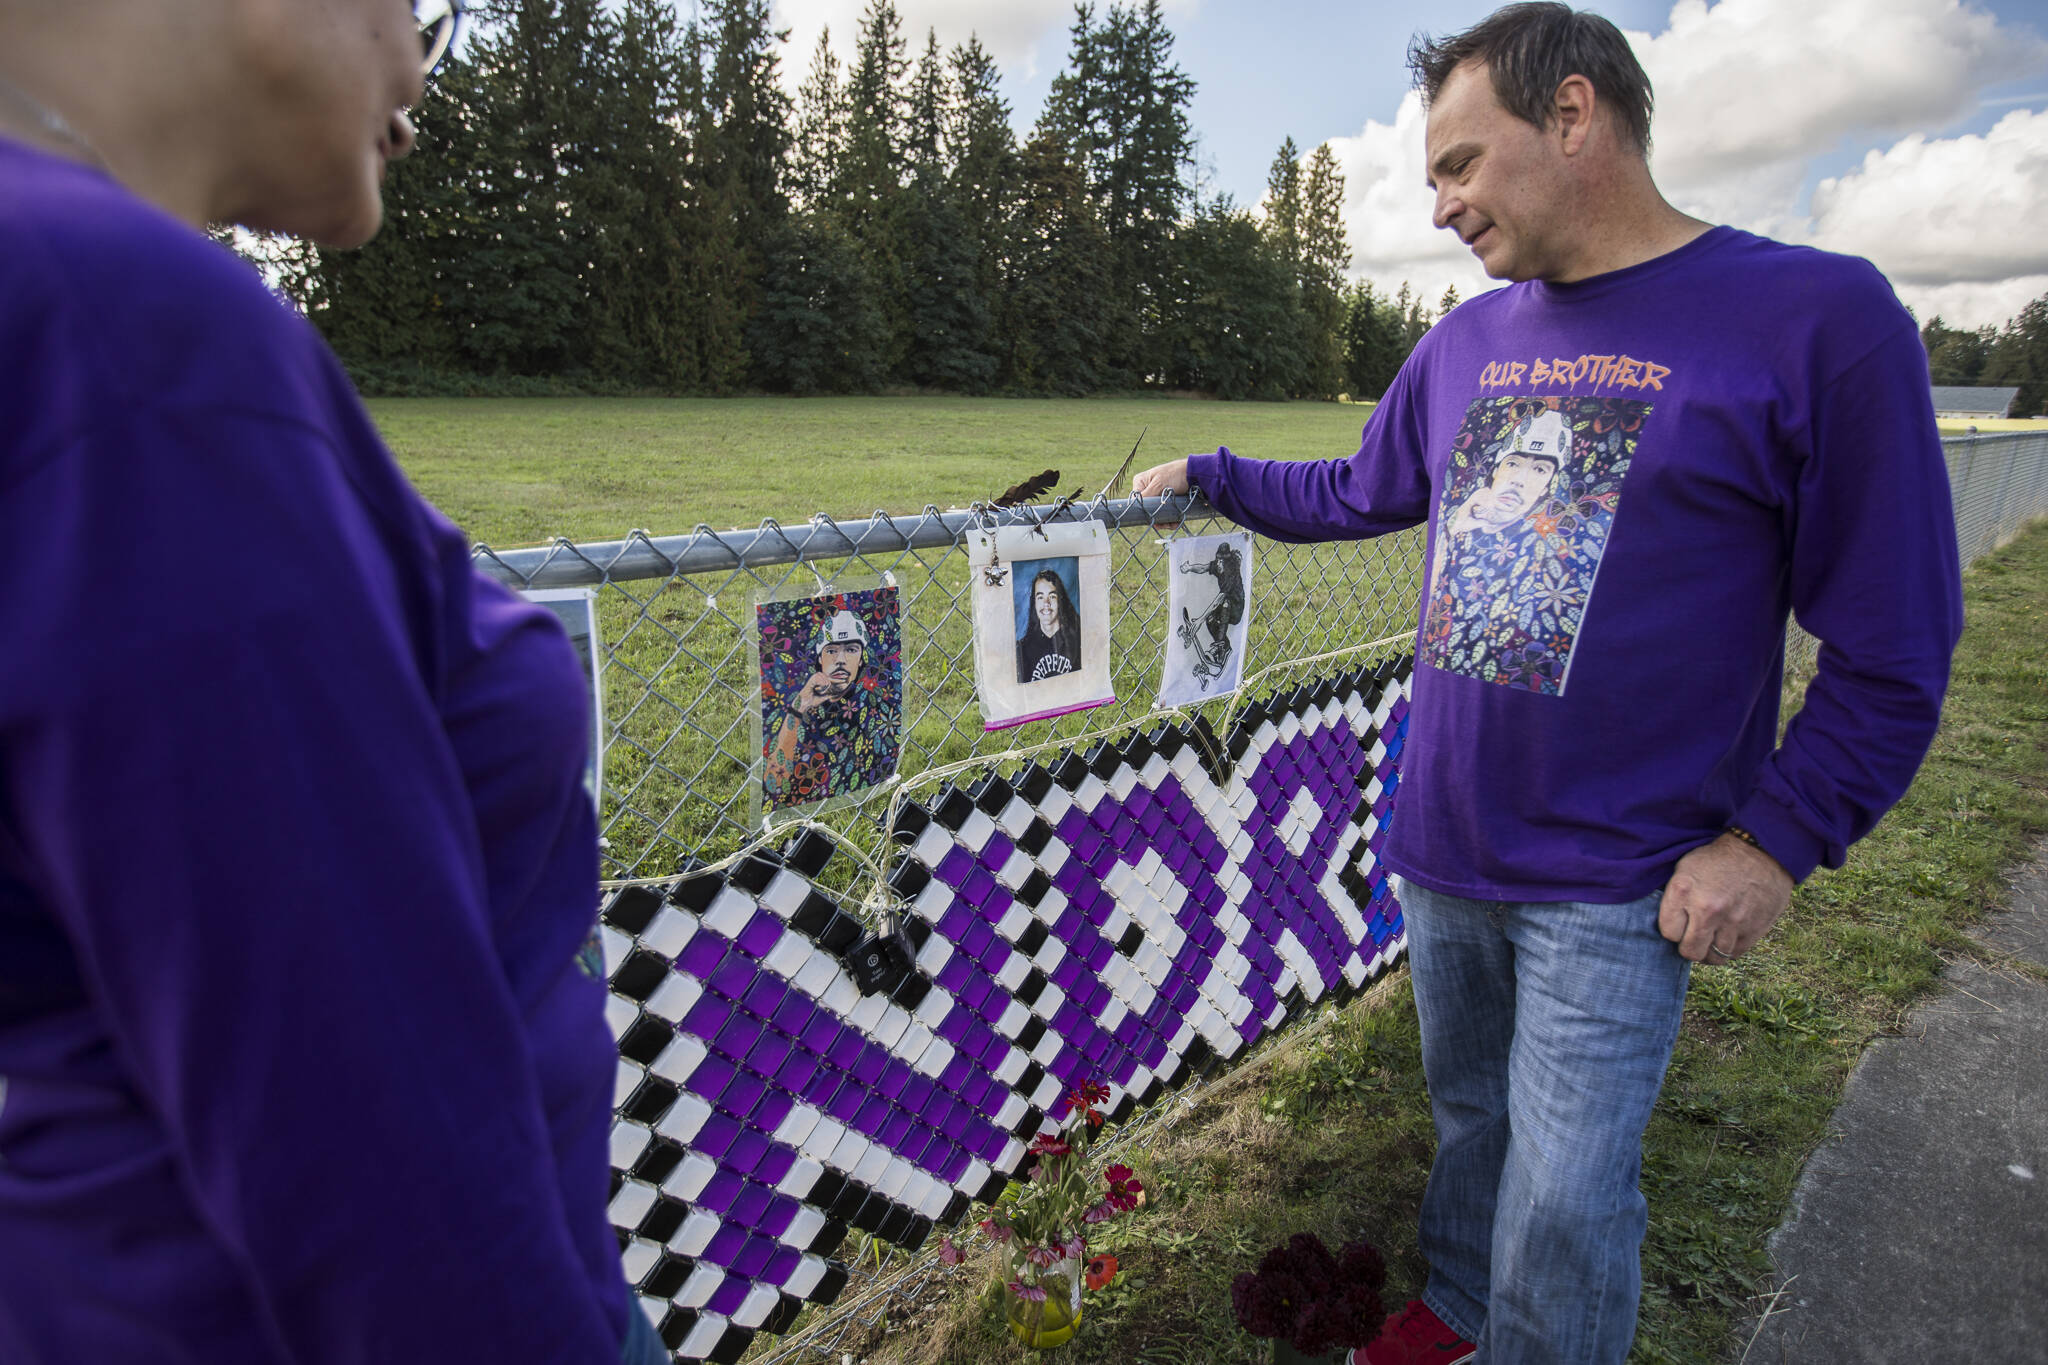 Chad Hofland and his wife, Xochitl, look at a photograph of their son Andre, 17, at a memorial along 116th Street on Oct. 7 in Marysville. Andre was was shot and killed in robbery on Jan. 5, 2021. (Olivia Vanni / The Herald)